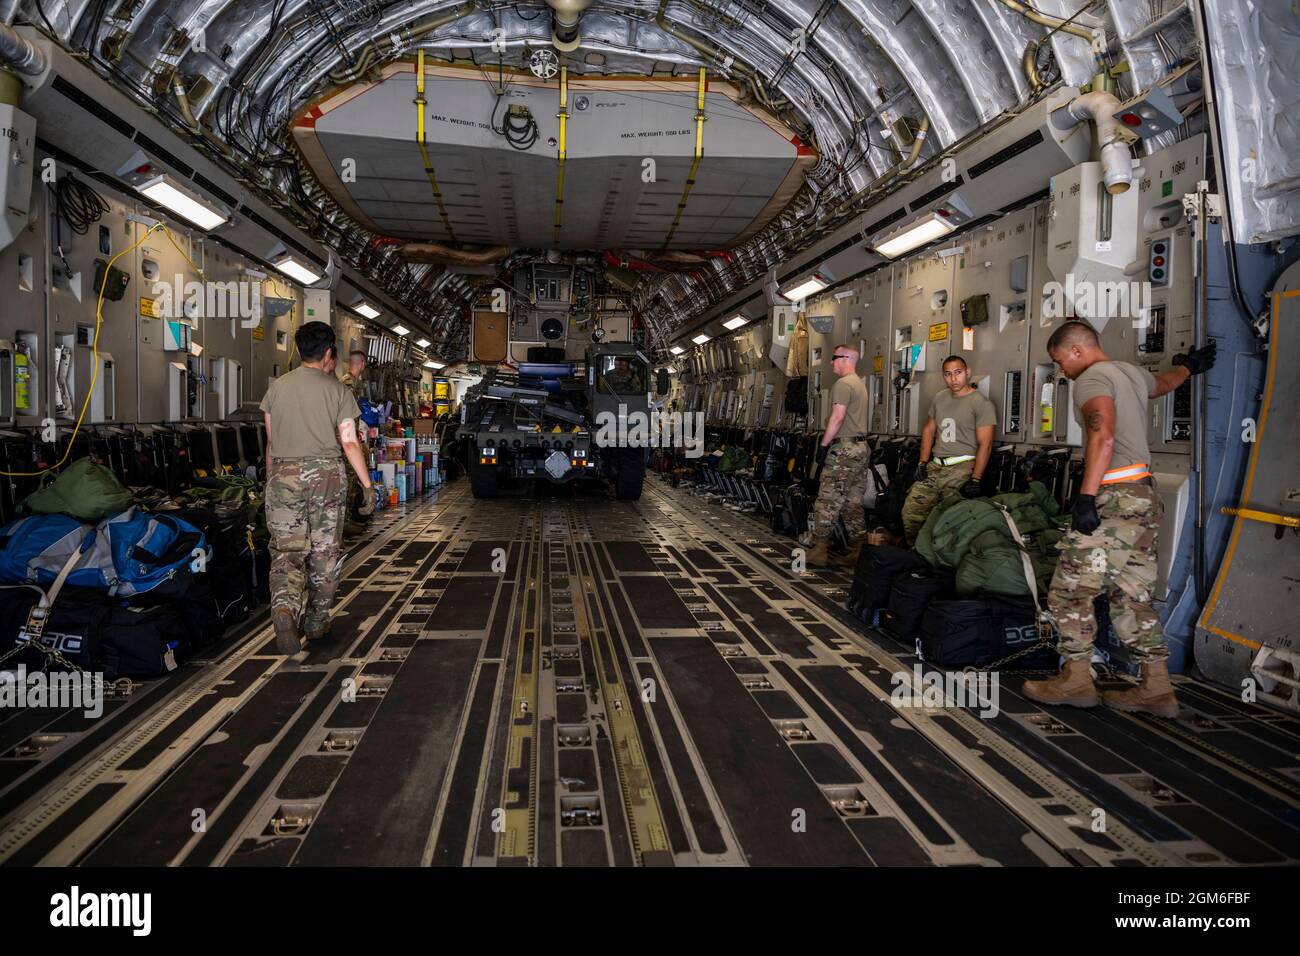 U.S. Airmen from the 60th Aerial Port Squadron ramp services load a K loader on to a C-17 Globemaster III from McChord Air Force Base, Washington, Aug. 25, 2021, on the flight line at Travis AFB, California. The McChord C-17 stopped while en route to an undisclosed location in support of Operation Allies Refuge to pick up Airmen and equipment from the 860th and 660th AMXS. The two maintenance squadrons maintain the C-17 and KC-10 Extender, respectively. The U.S. Air Force, in support of the Department of Defense, moved forces into theater to facilitate the safe departure and relocation of U.S. Stock Photo